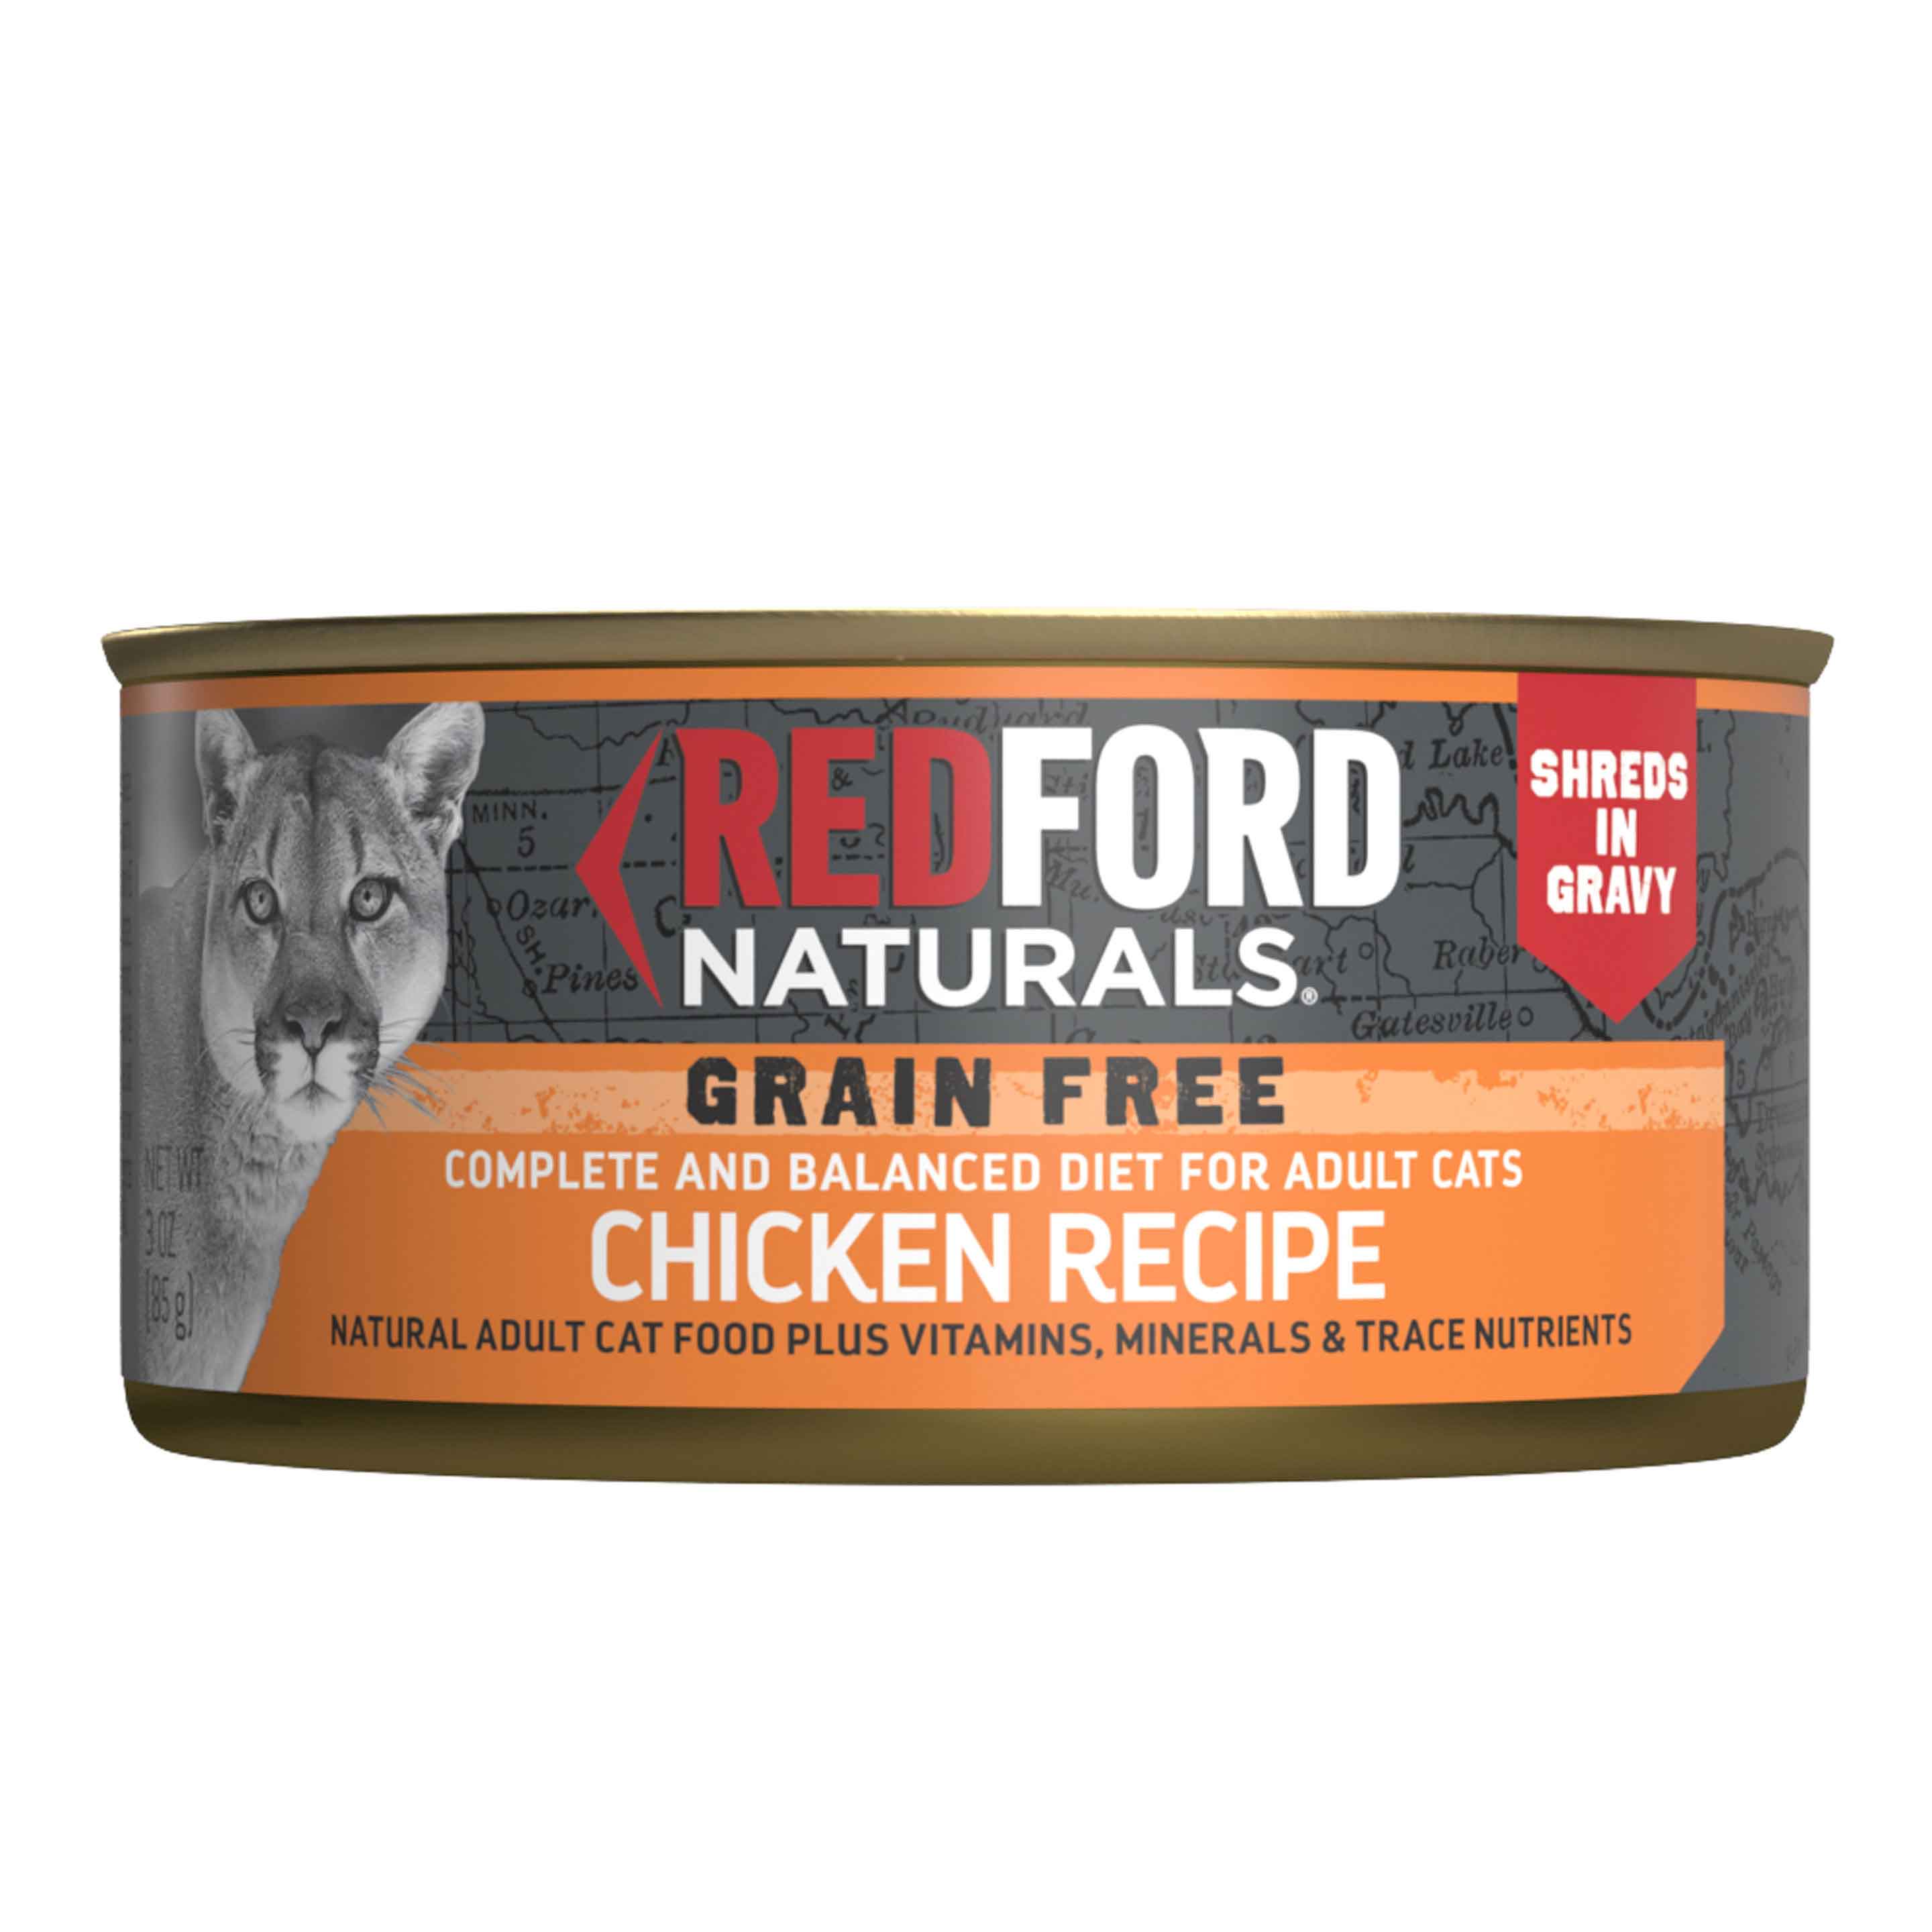 Redford Naturals Grain Free Shreds in Gravy Chicken Recipe Adult Cat Food, 3 Ounces